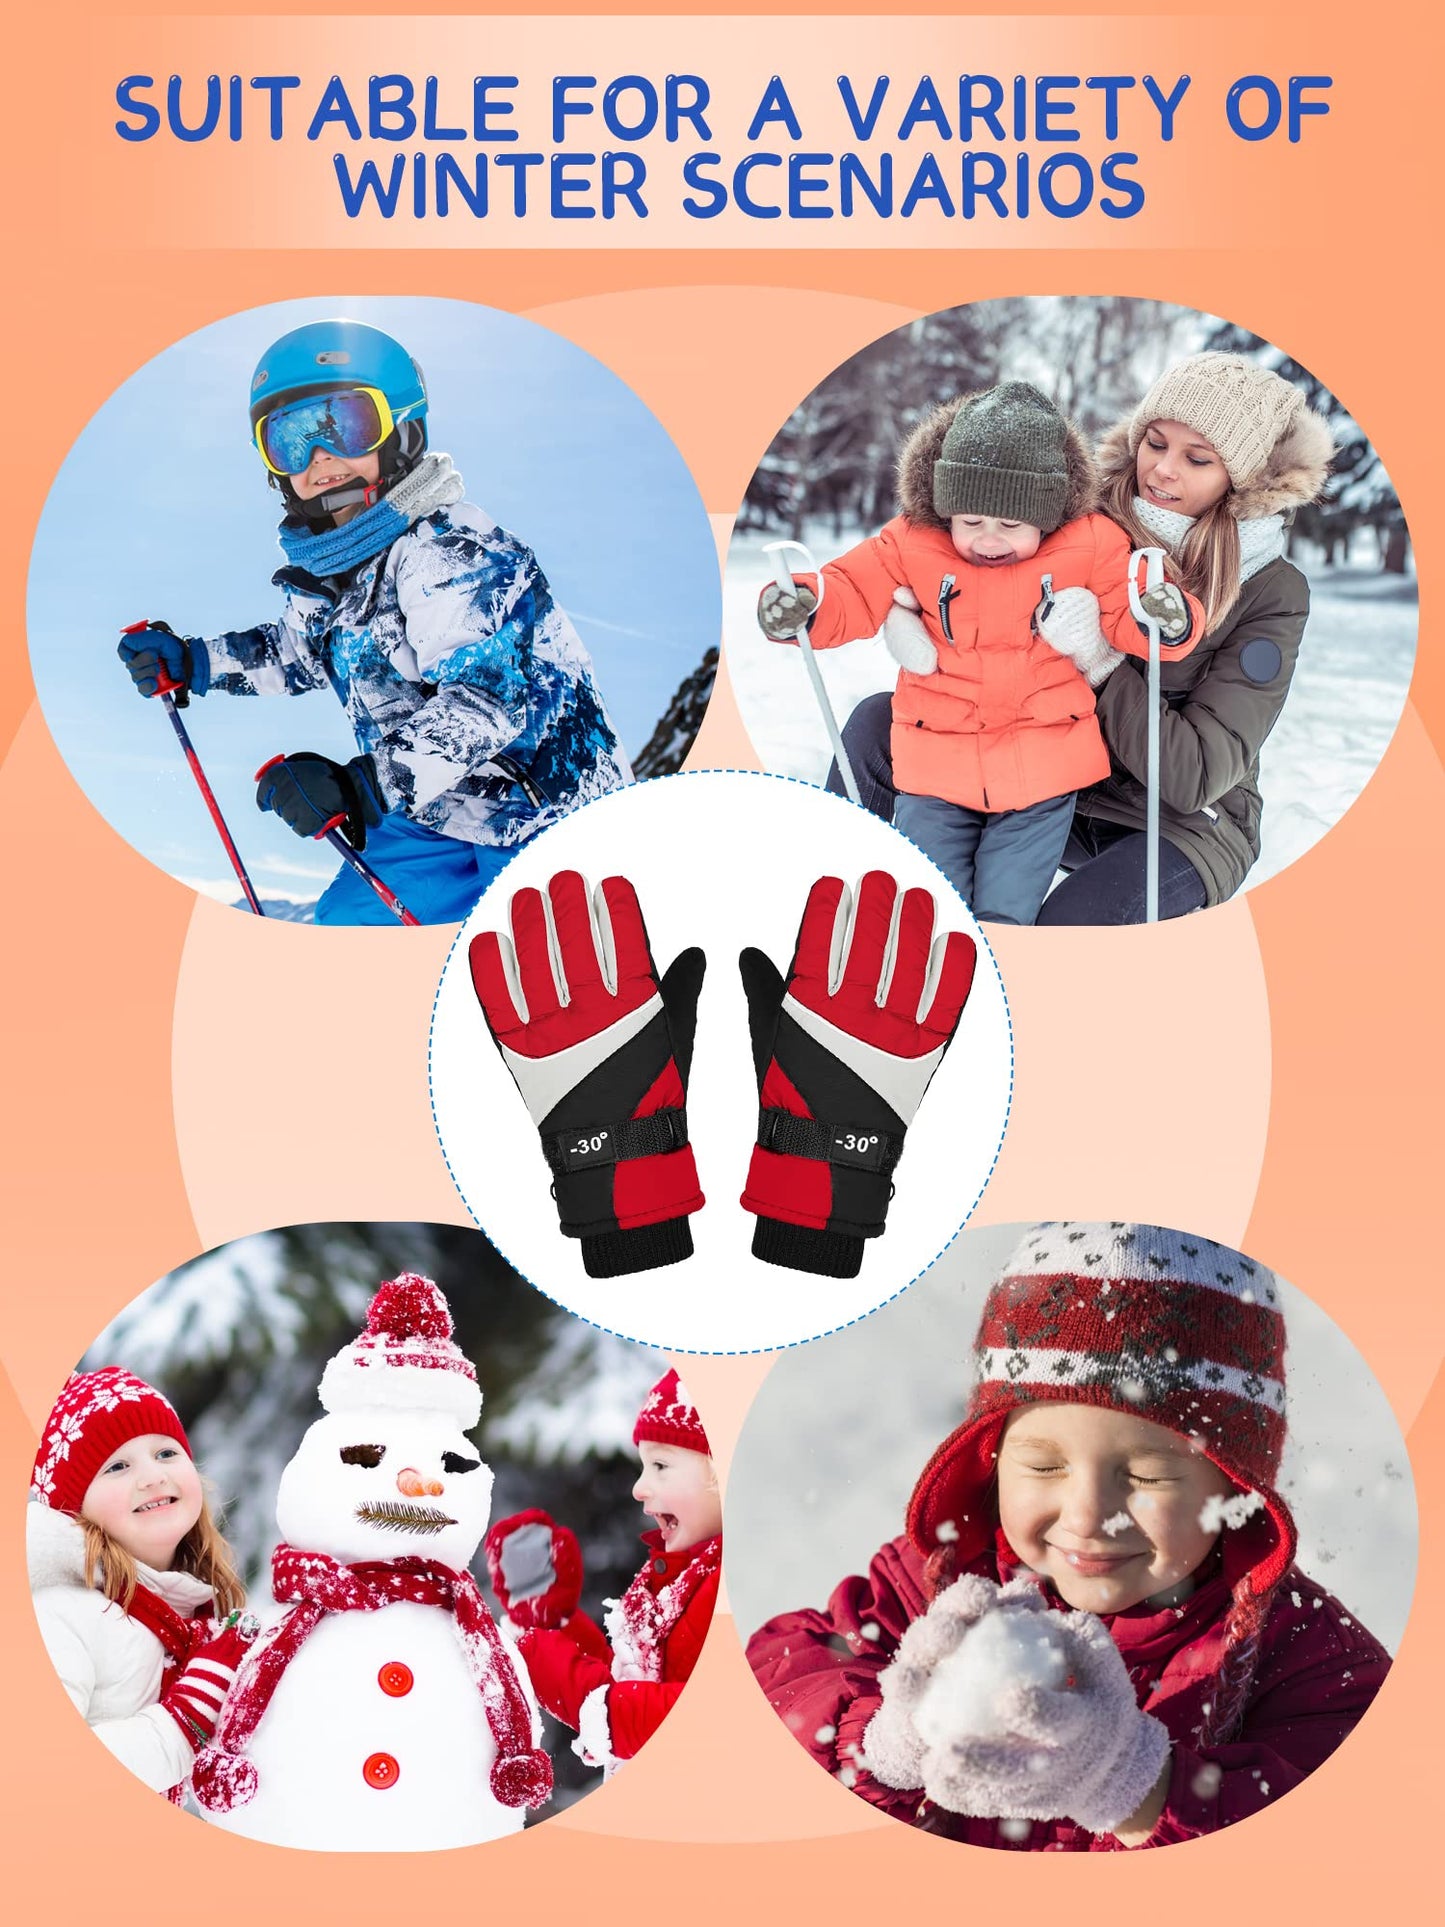 Hicarer 3 Pairs Kids Winter Gloves Waterproof Snow Ski Gloves Windproof Warm Unisex Thermal Snow Mitten for Cold Weather Girls Boys